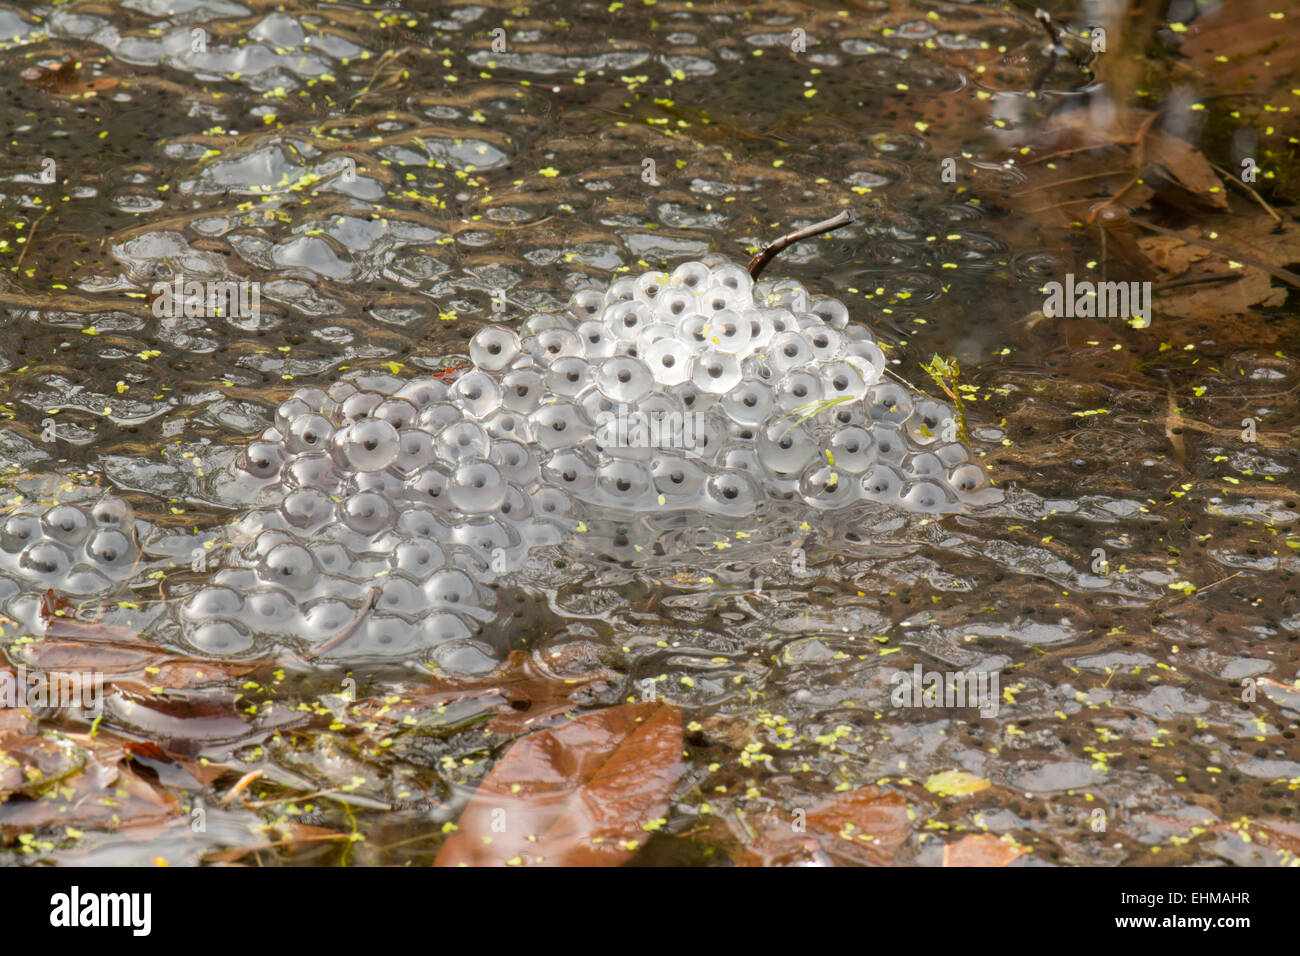 fresh frogspawn in garden pond protruding out of the water - Scotland, UK Stock Photo